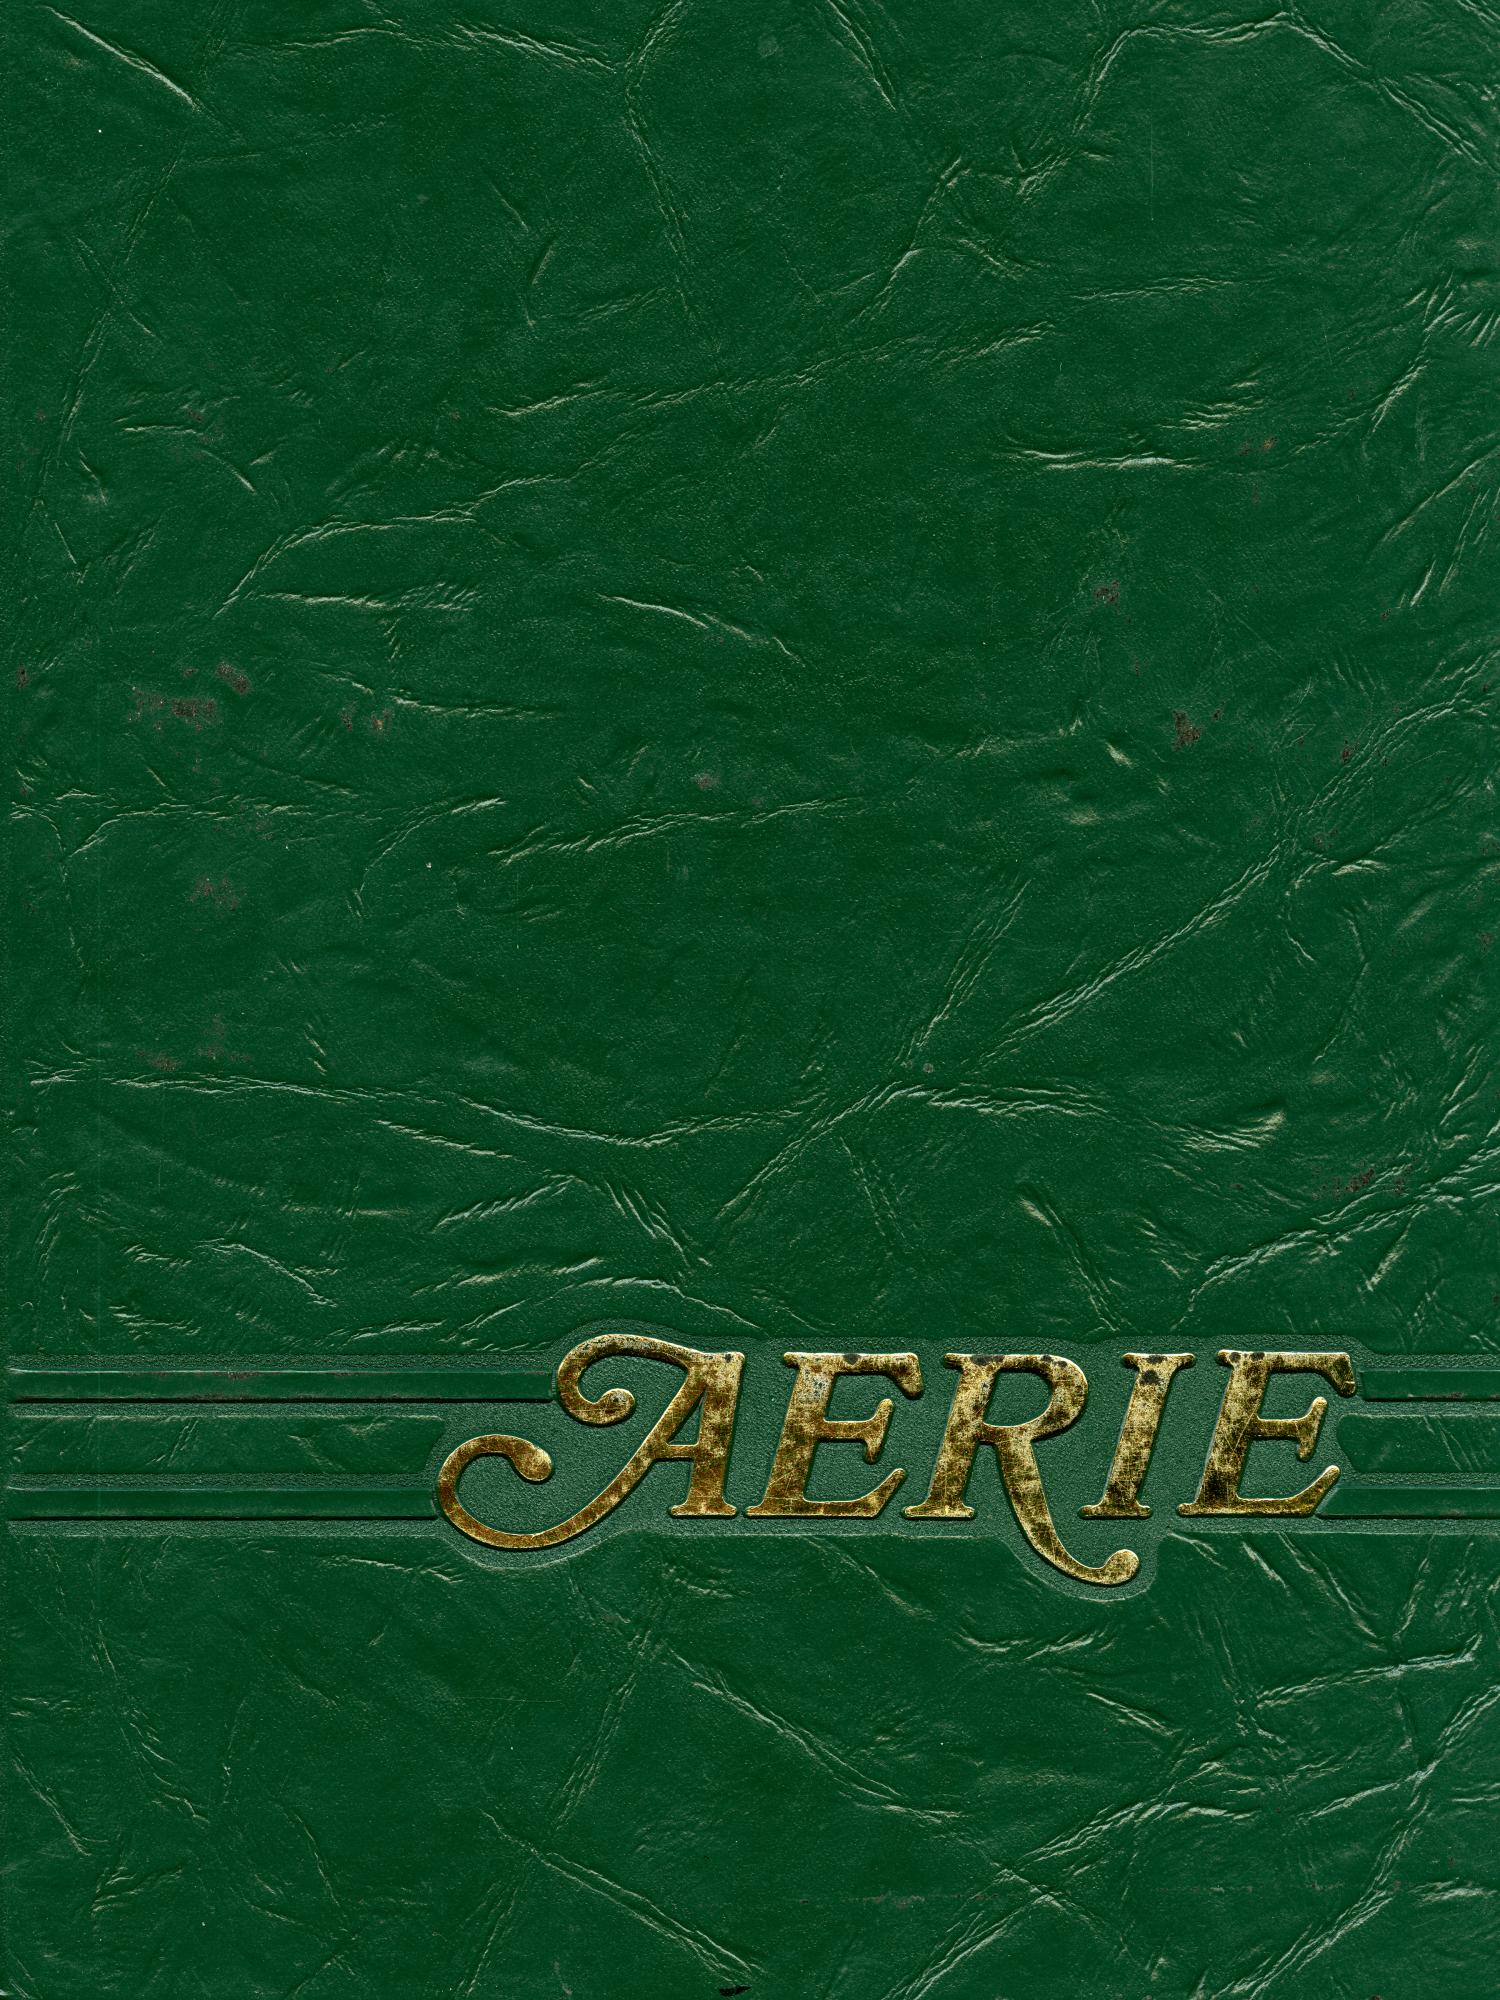 The Aerie, Yearbook of North Texas State University, 1982
                                                
                                                    Front Cover
                                                